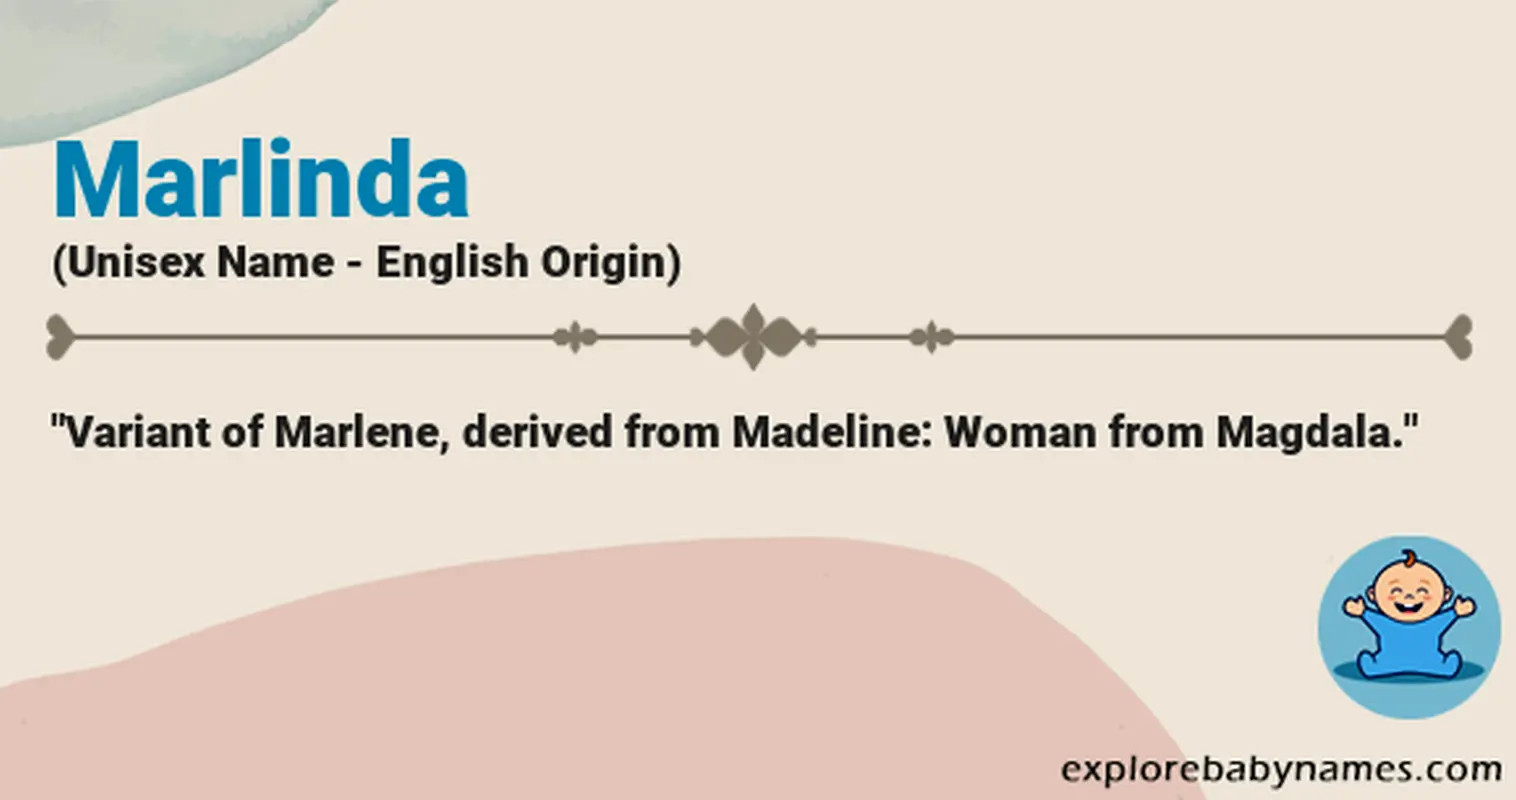 Meaning of Marlinda